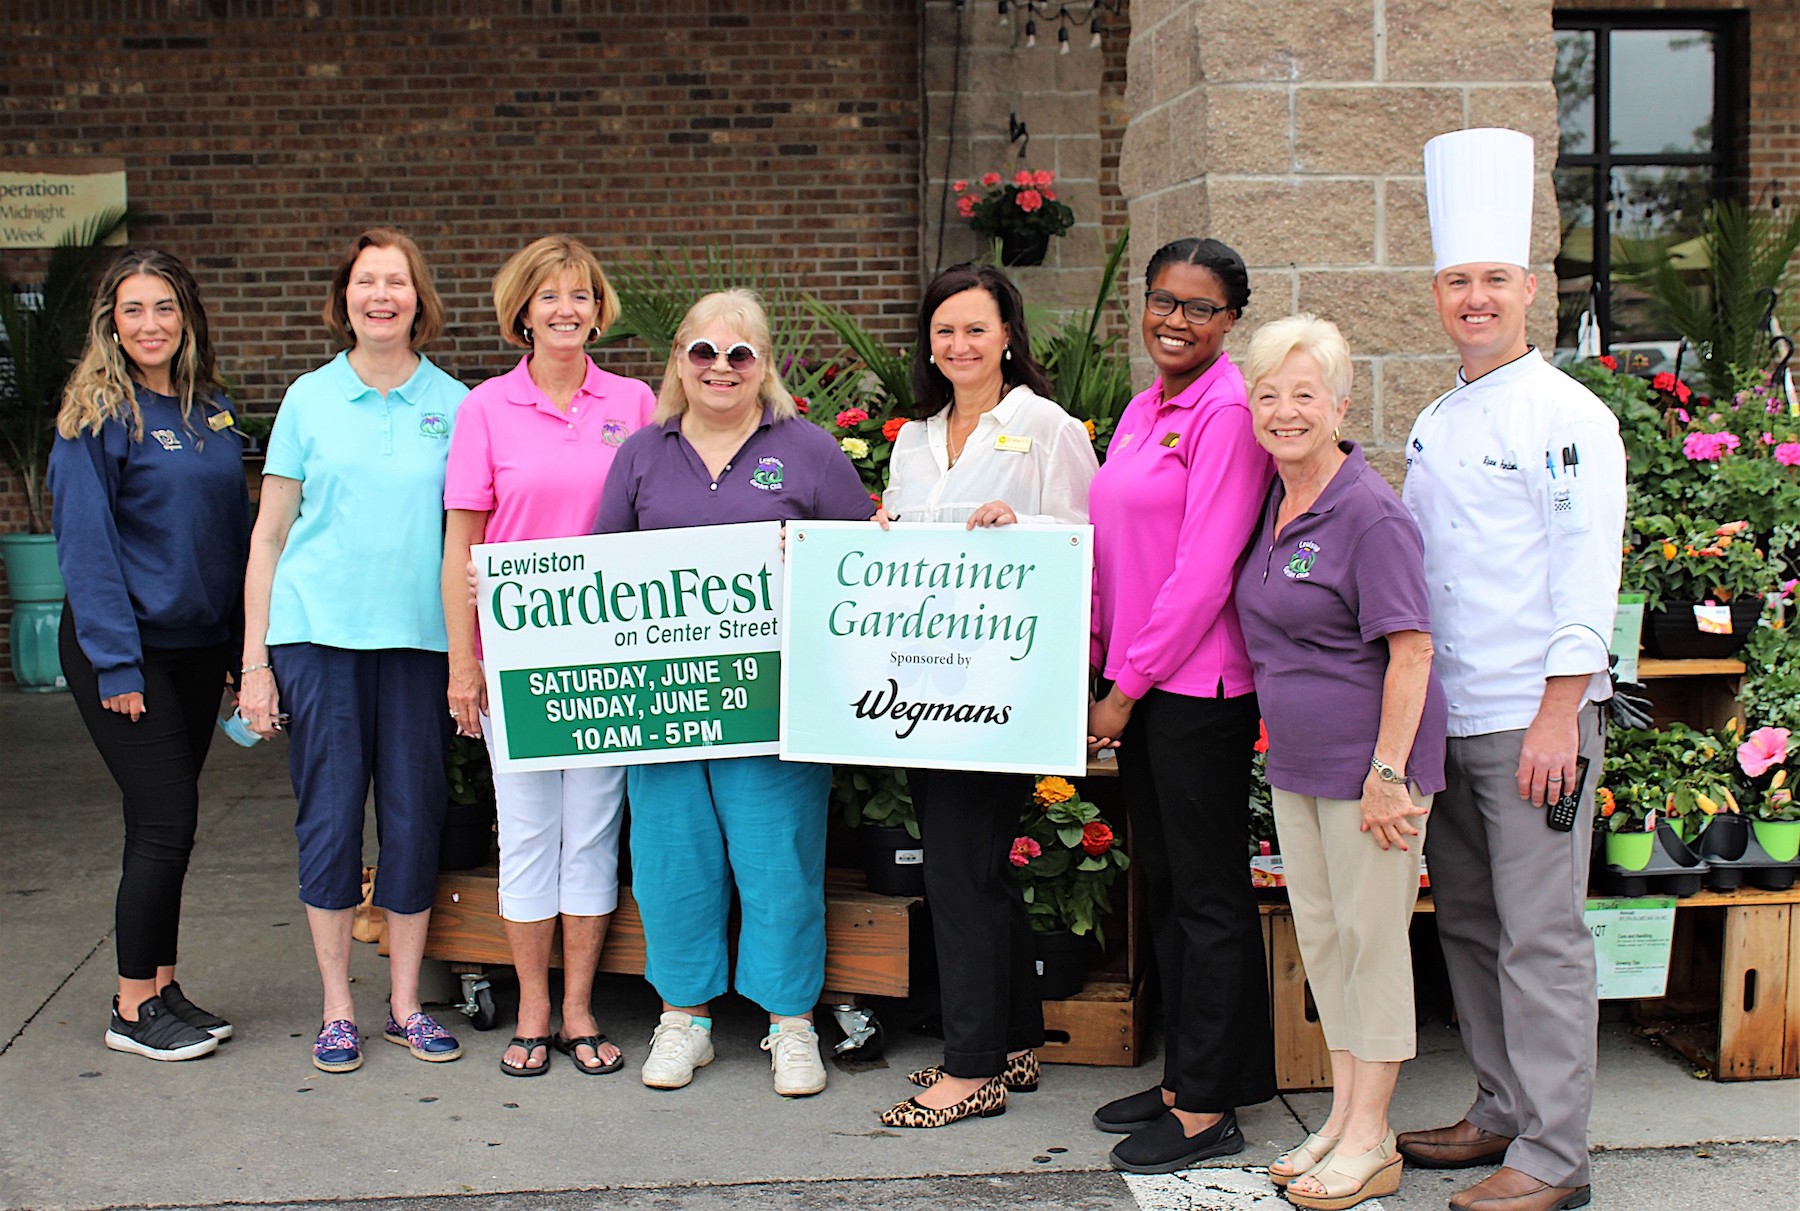 Lewiston Garden Club members are joined by Wegmans employees. (Photo by Robert Albee)